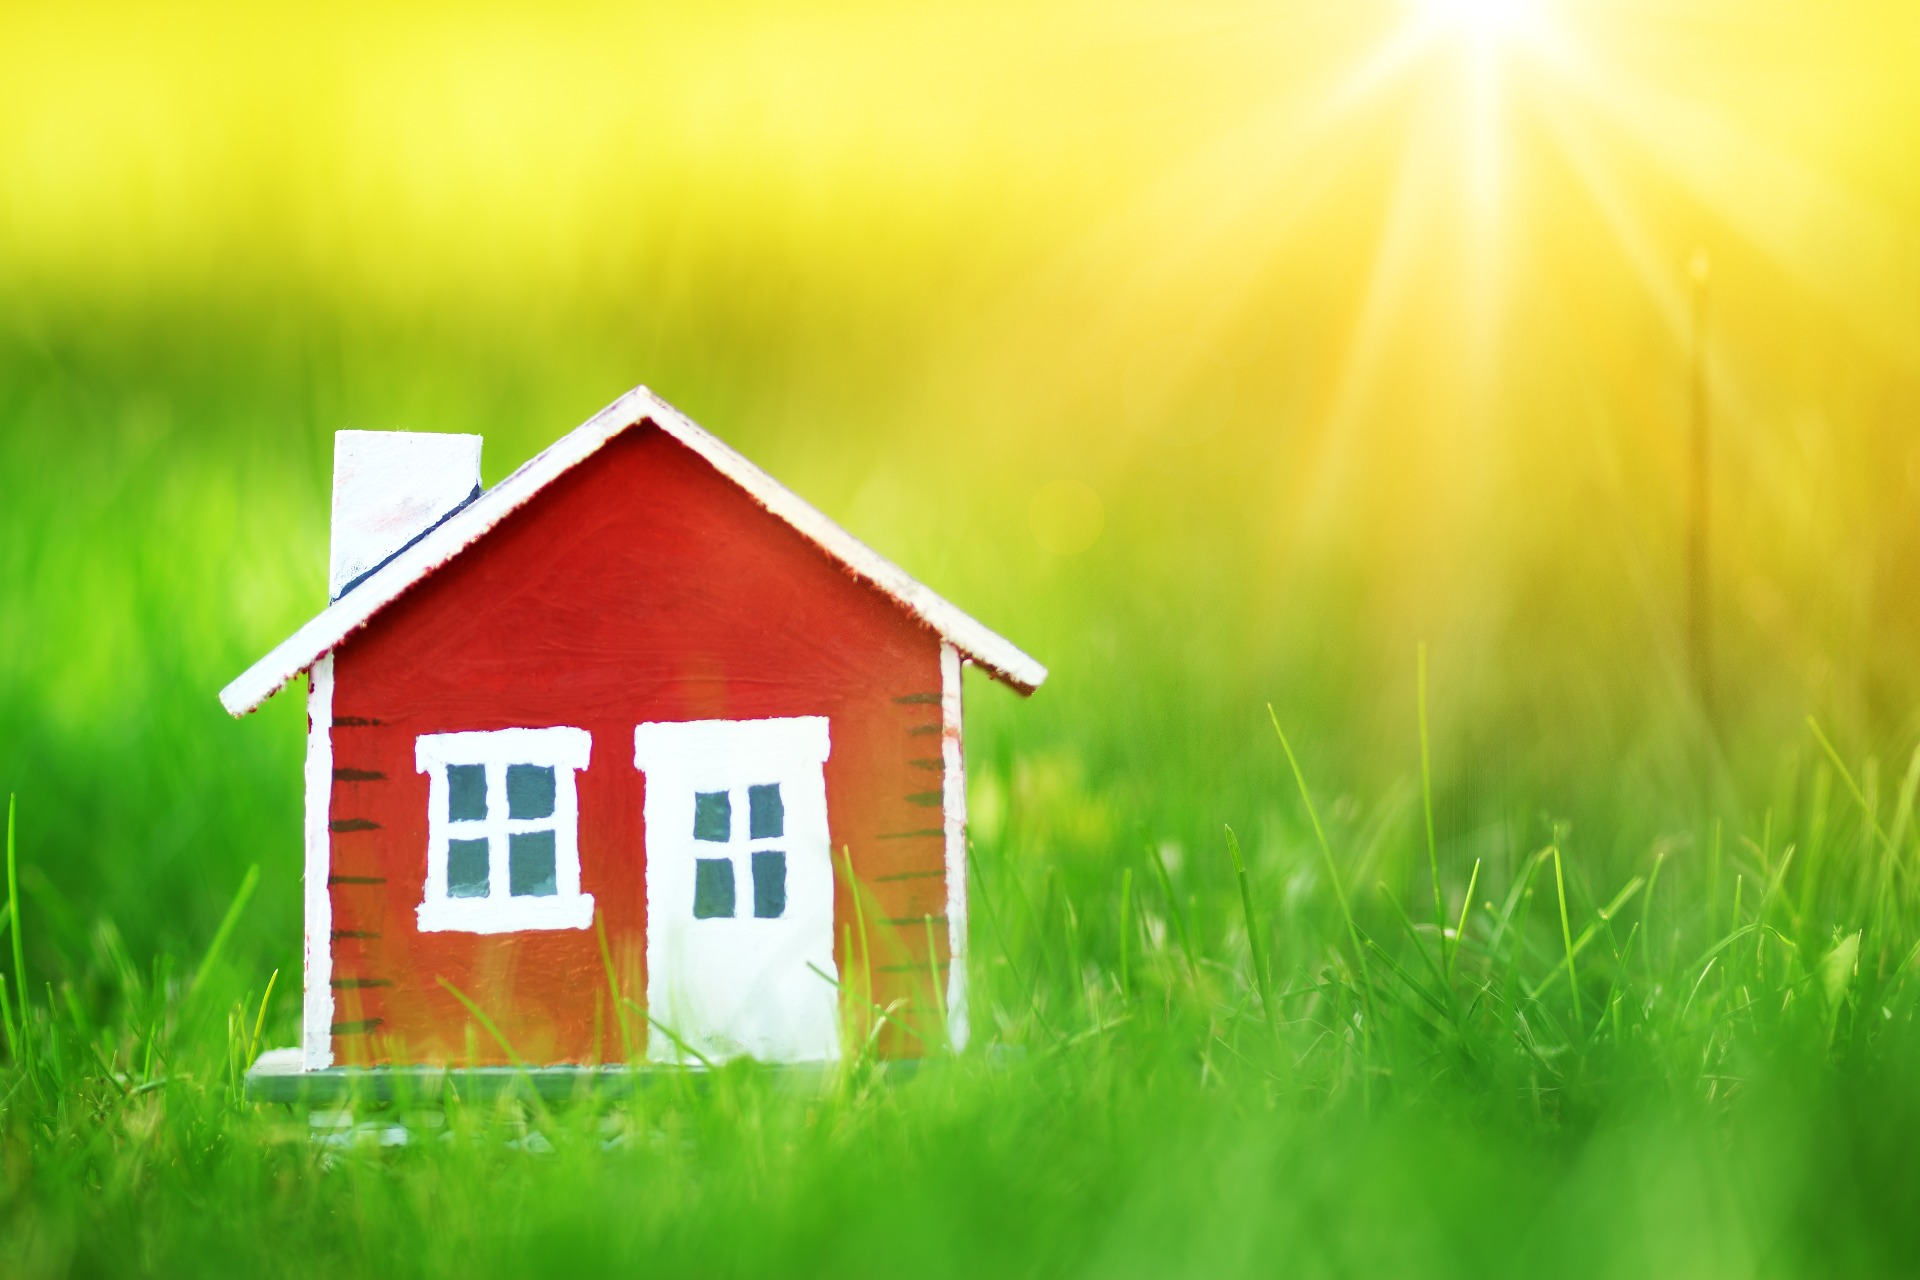 A green field, with a wooden, red house with white door and window; our Conveyancing Solicitors in Preston discuss how many people move house, and how our Conveyancing Solicitors can assist.